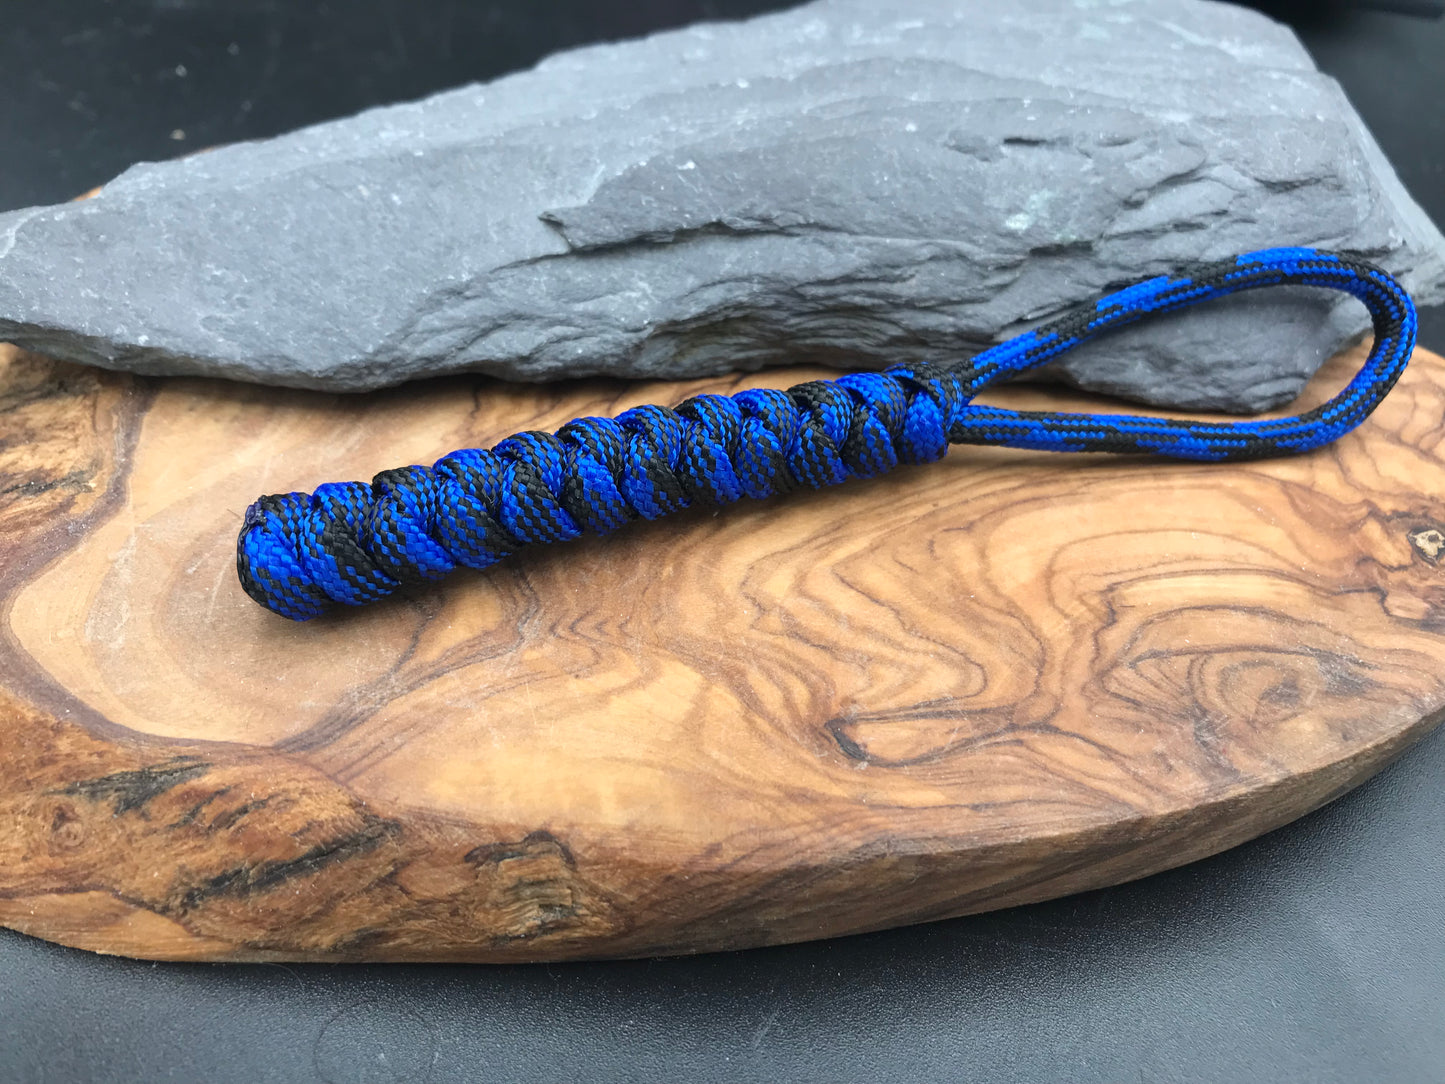 Paracord Lanyards for multi tools and EDCs